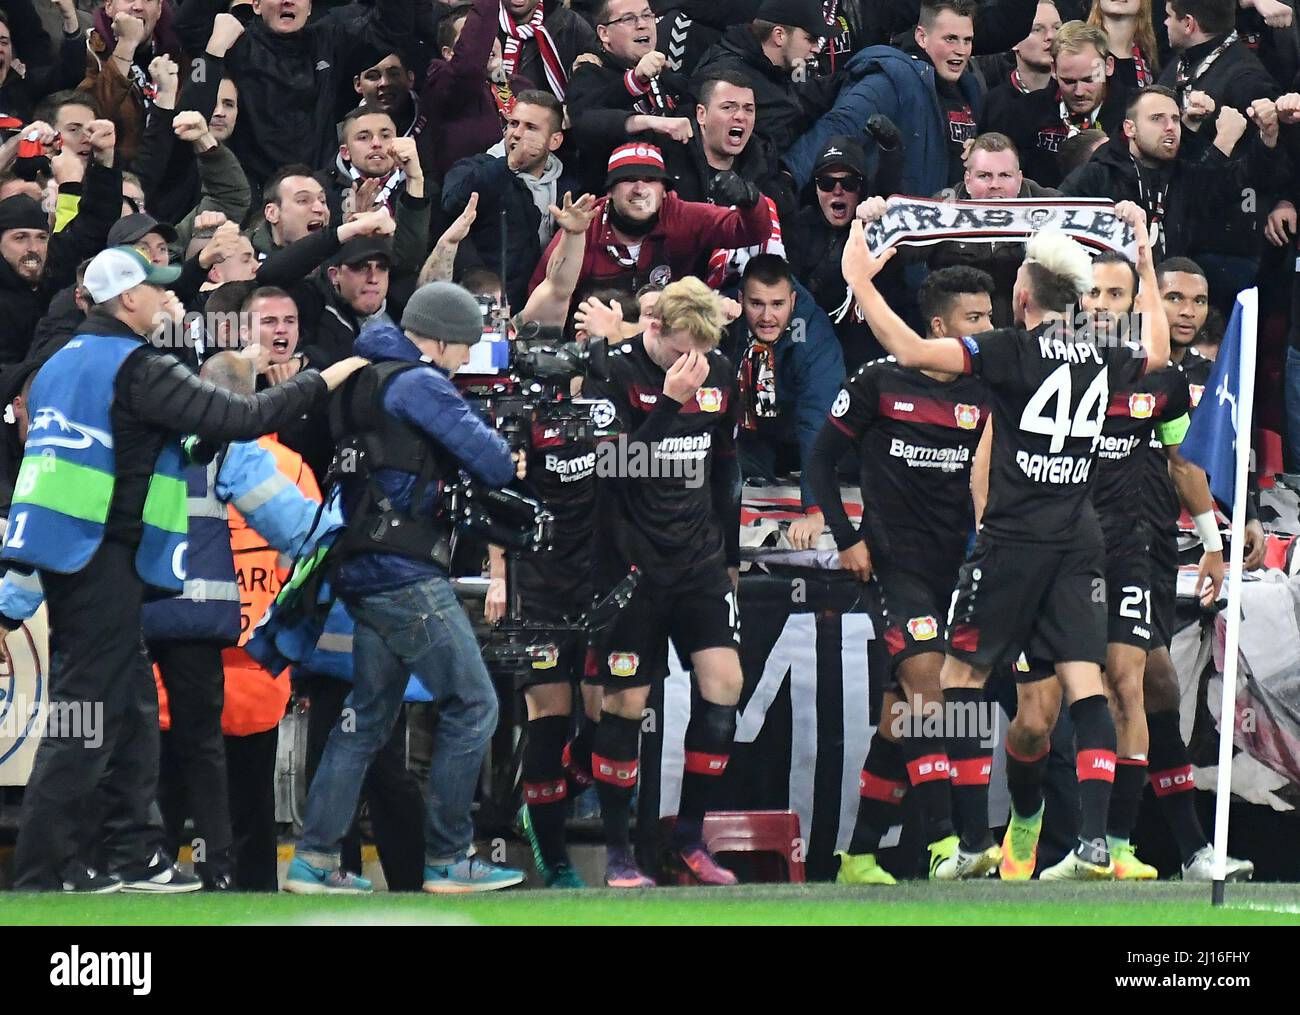 LONDON, ENGLAND - NOVEMBER 2, 2016: Leverkusen players celebrate with the fans after a goal scored during the UEFA Champions League Group E game between Tottenham Hotspur and Bayern Leverkusen at Wembley Stadium. Copyright: Cosmin Iftode/Picstaff Stock Photo